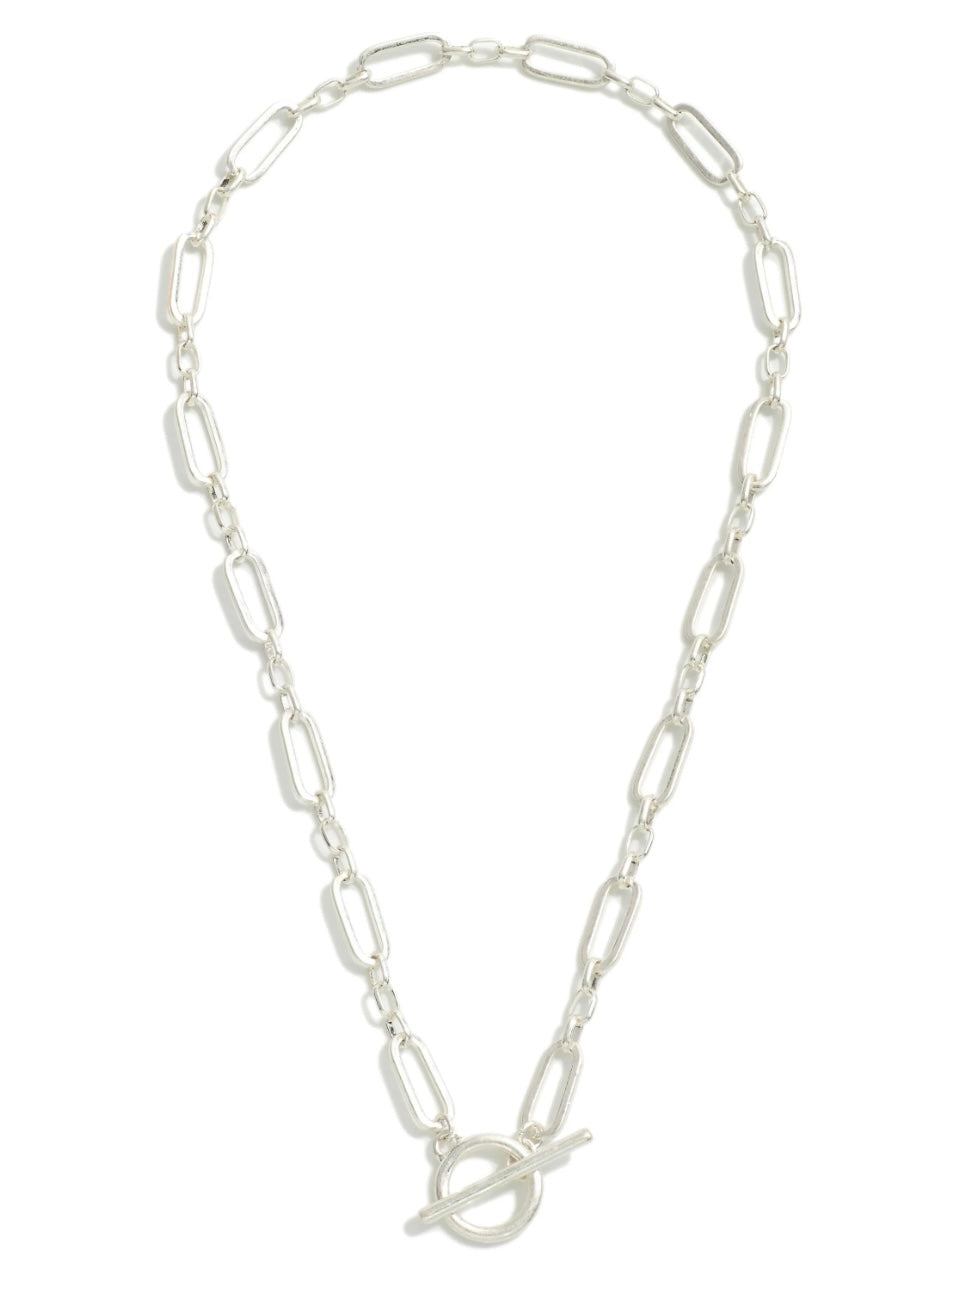 TOGGLE PAPERCLIP CHAIN NECKLACE